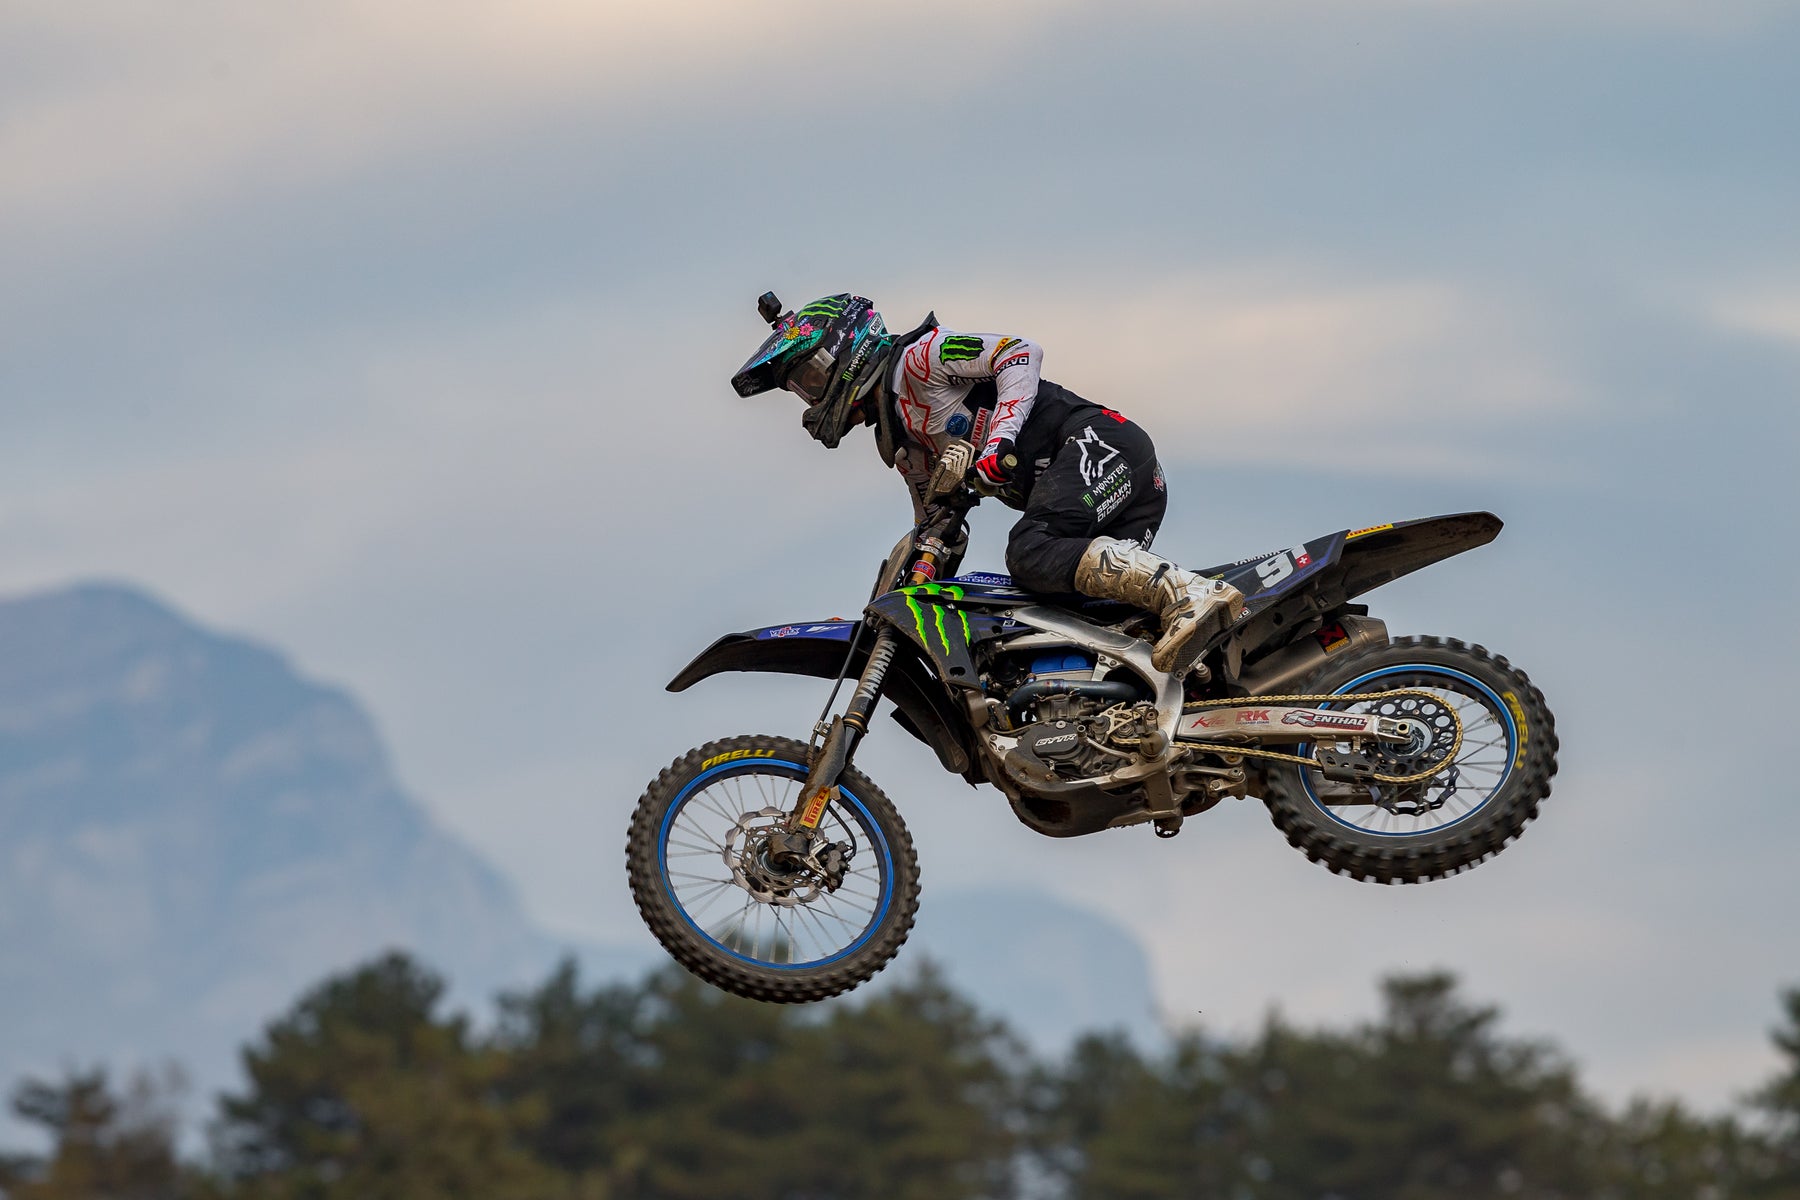 HIGH-FLYING JEREMY SEEWER WINS MXGP OF GARDA, ITALY; ROMAIN FEBVRE SNATCHES THIRD